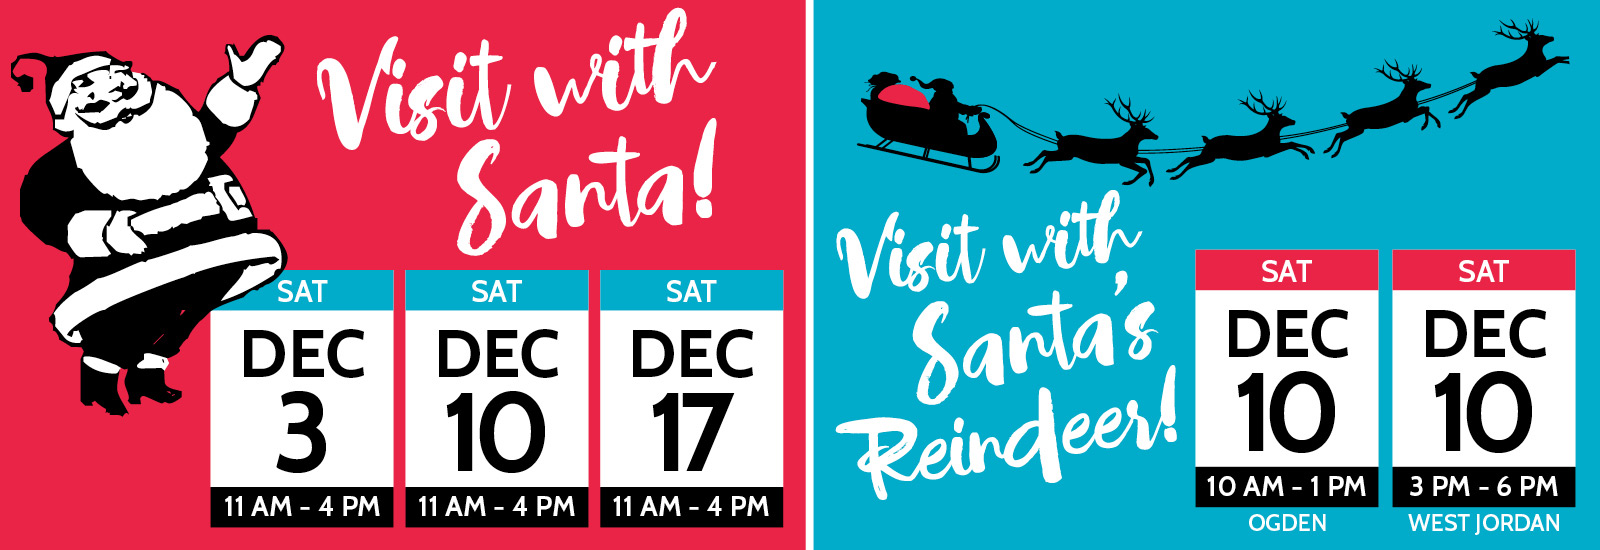 Visit us on the dates listed to visit with Santa Claus and his Reindeer.